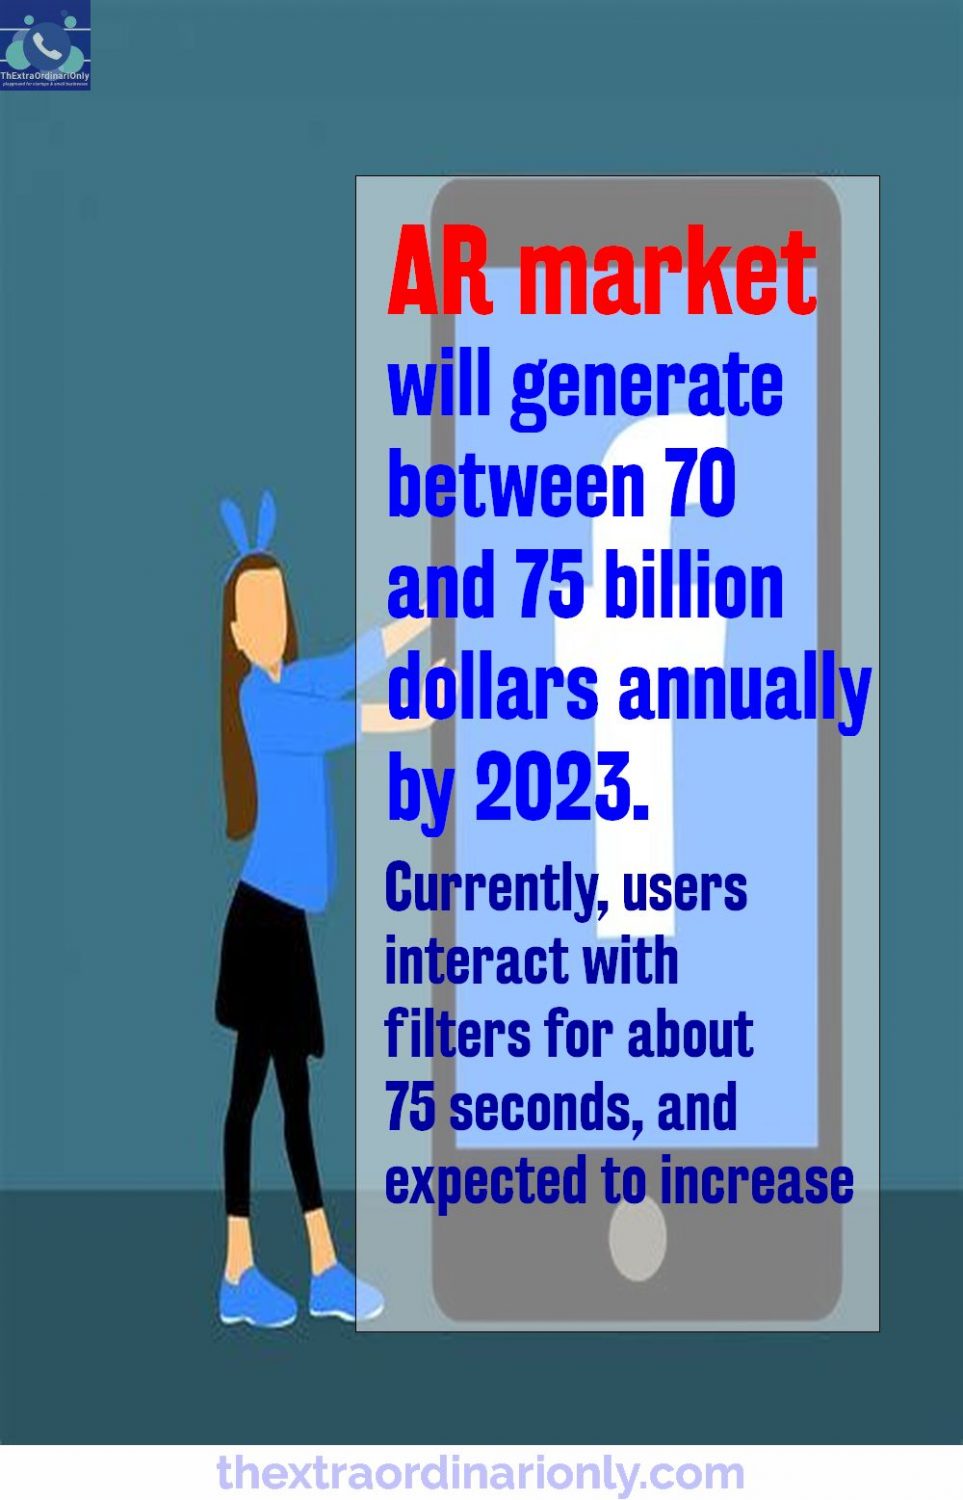 AR market will generate between 70 and 75 billion dollars annually by 2023